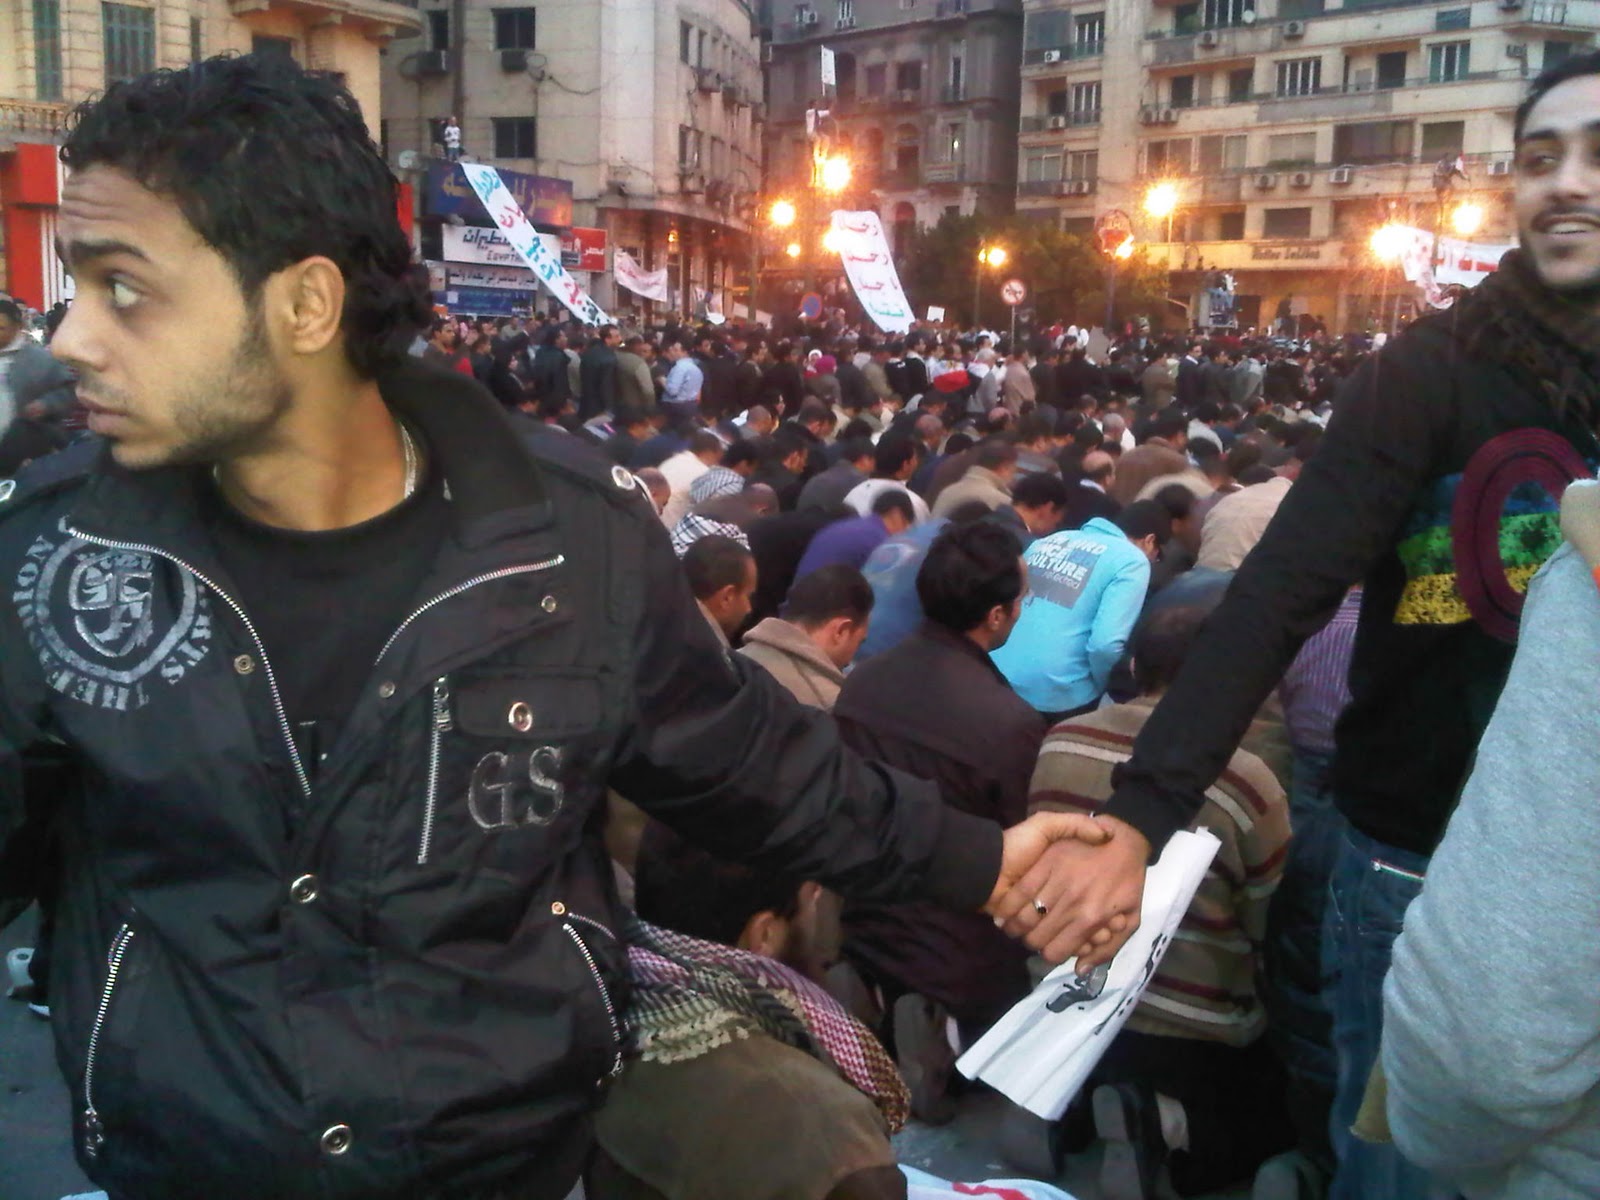 Christians protecting Muslims as they pray during the revolution. Cairo, Egypt, 2011